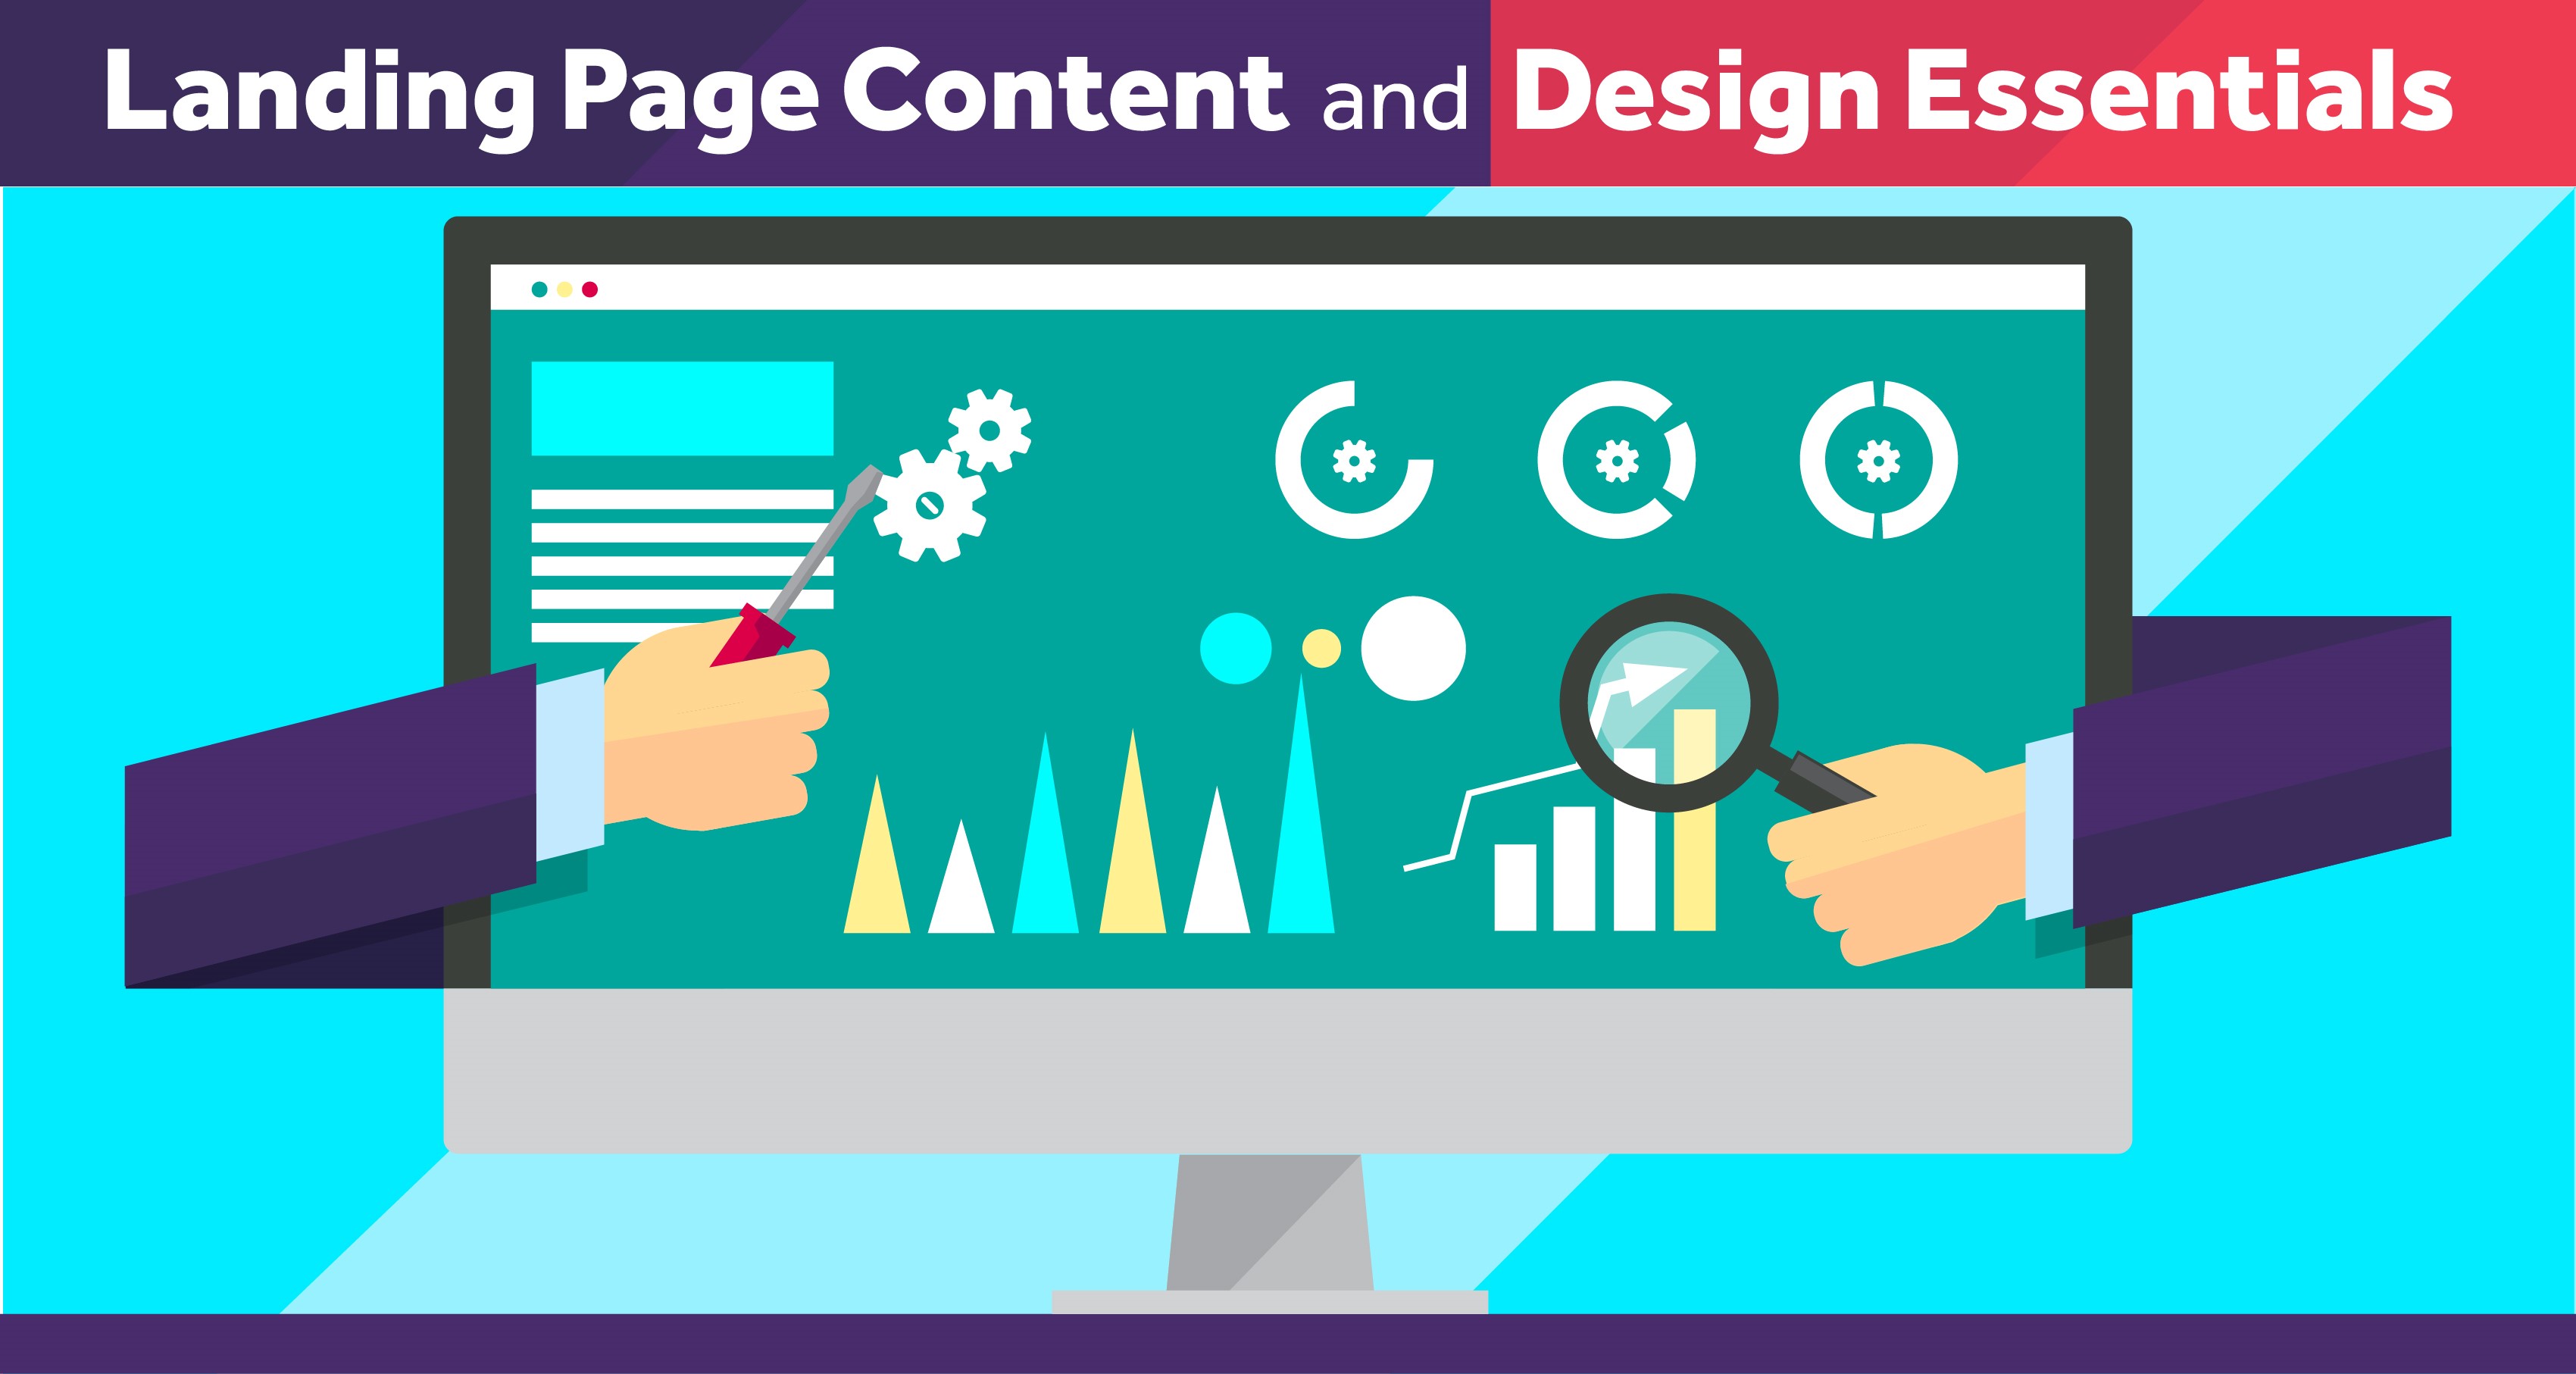 Landing Page Content and Design Essentials